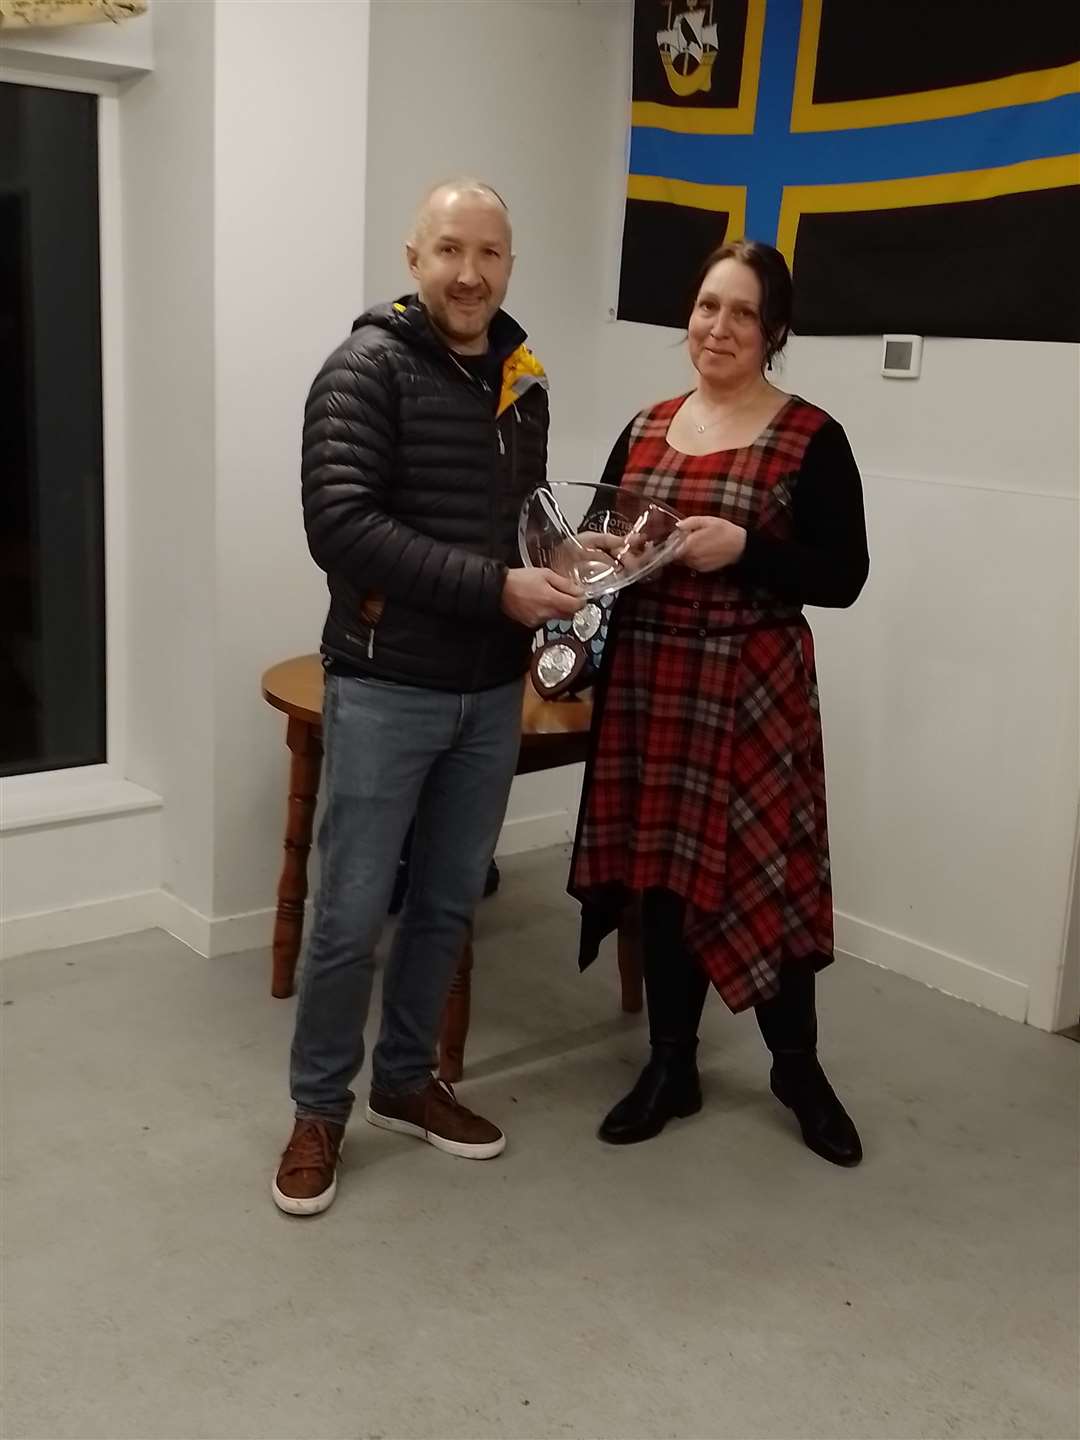 David Blackwood receives the Caithness service-to-sport award on behalf of his father Peter from Scottish Club Sport's vice chair Jackie Smith. Peter has not been keeping the best of health recently and was unable to attend the ceremony